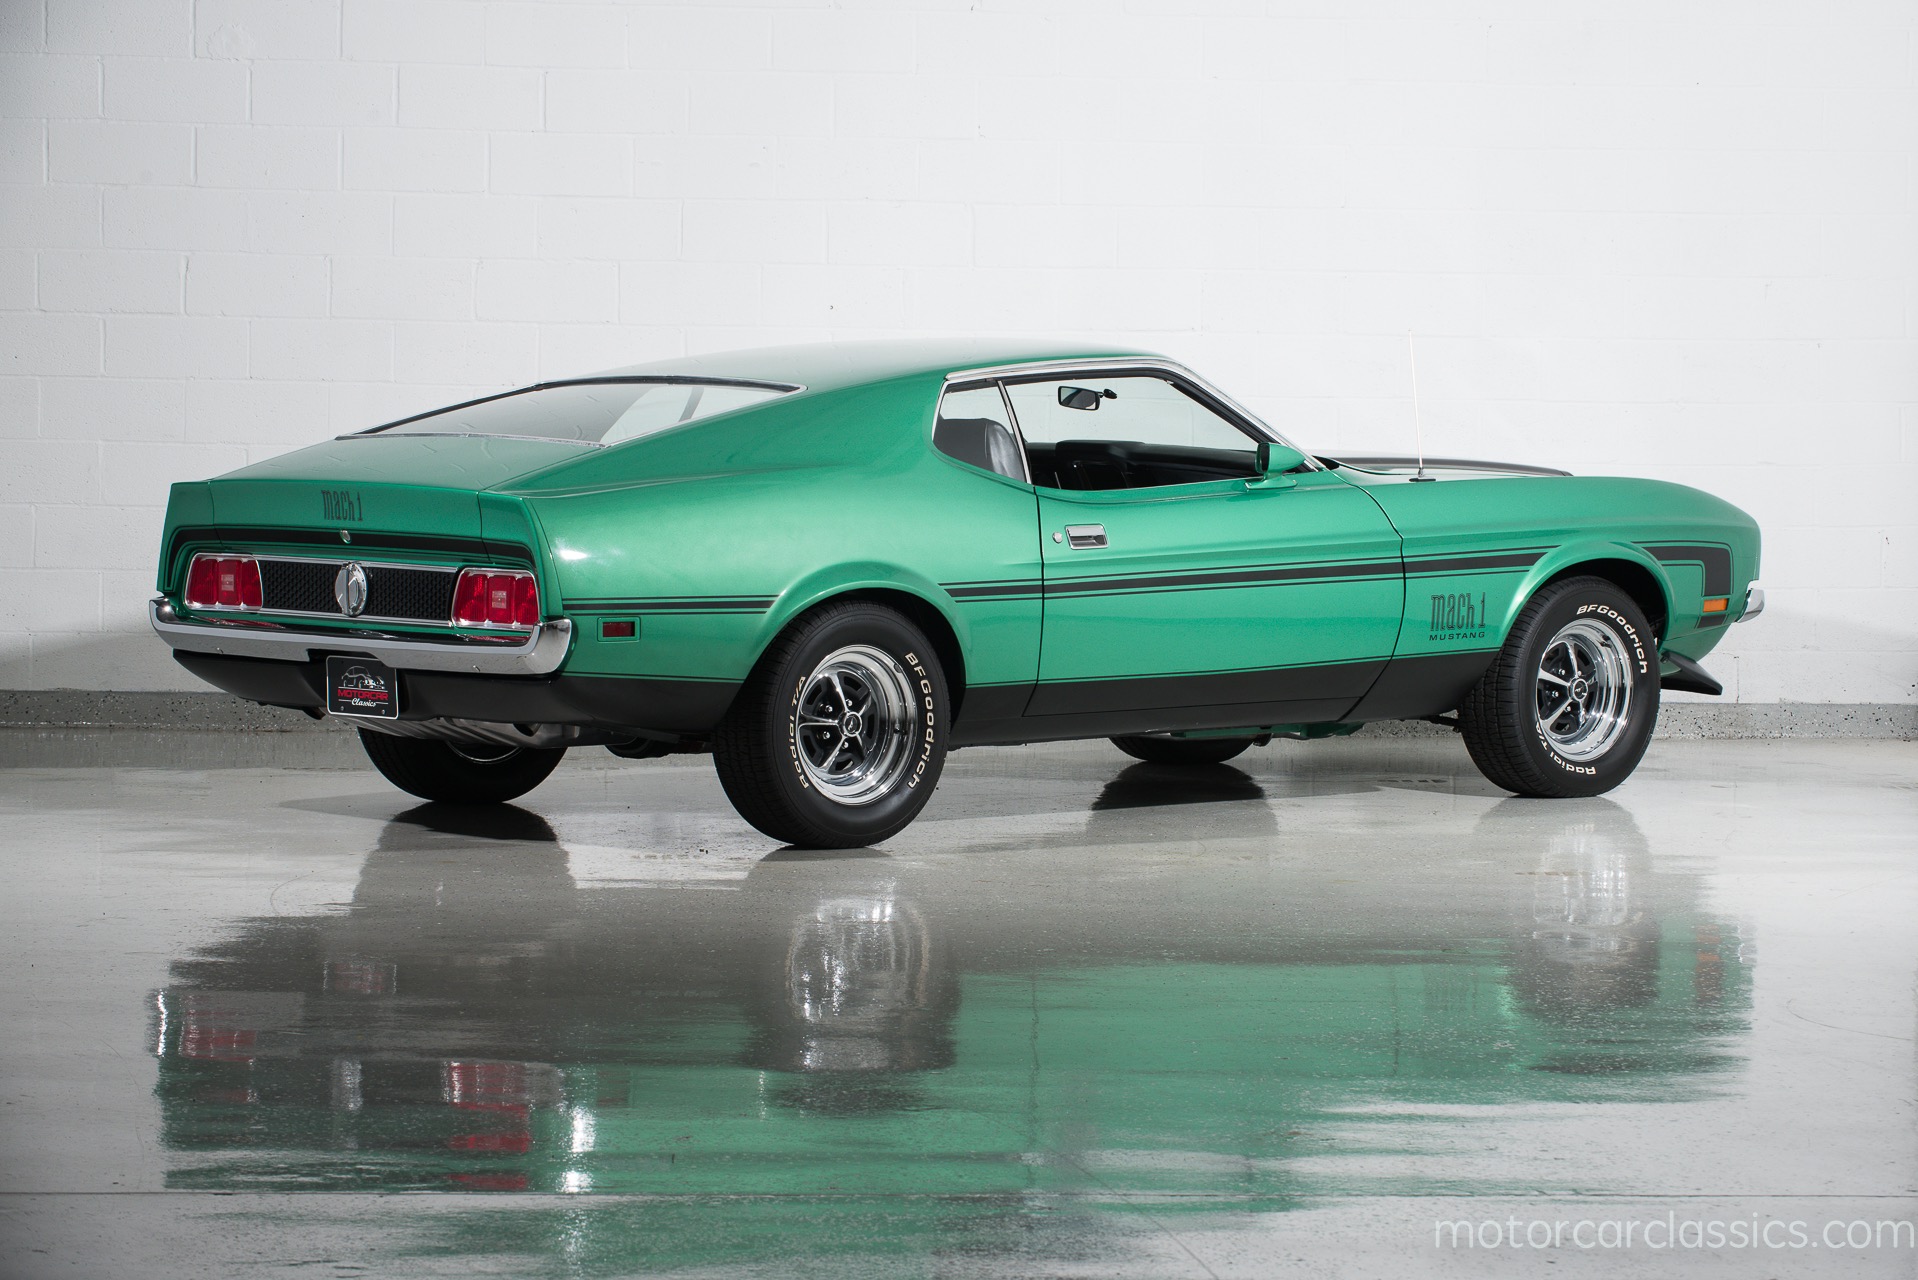 Used 1971 Ford Mustang Mach 1 For Sale 44900 Motorcar Classics